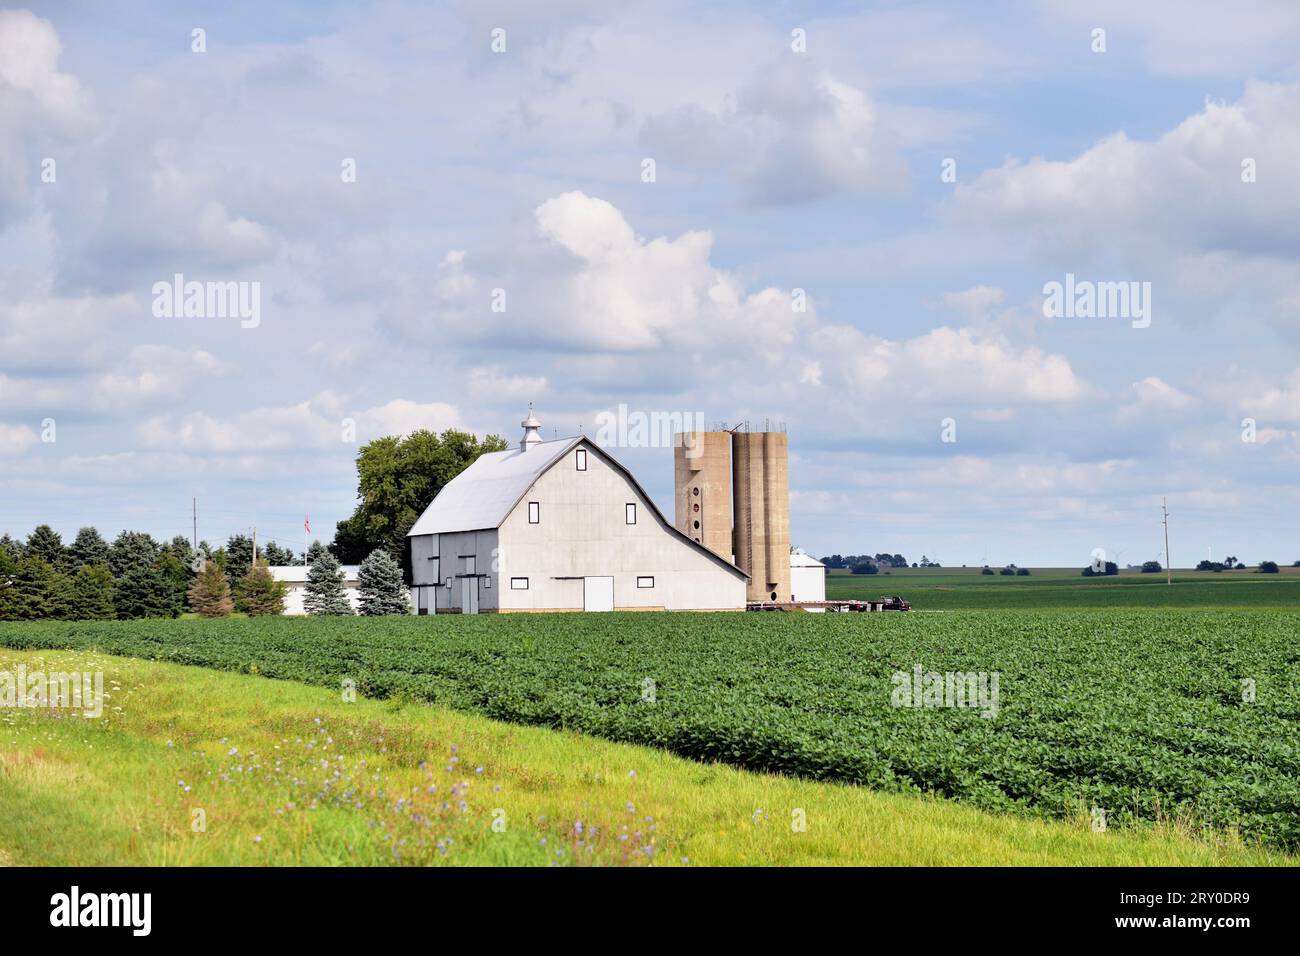 Chana, Illinois, USA. Tidy, white barn sitting beyond a field of maturing soybeans on a bright summer afternoon. Stock Photo